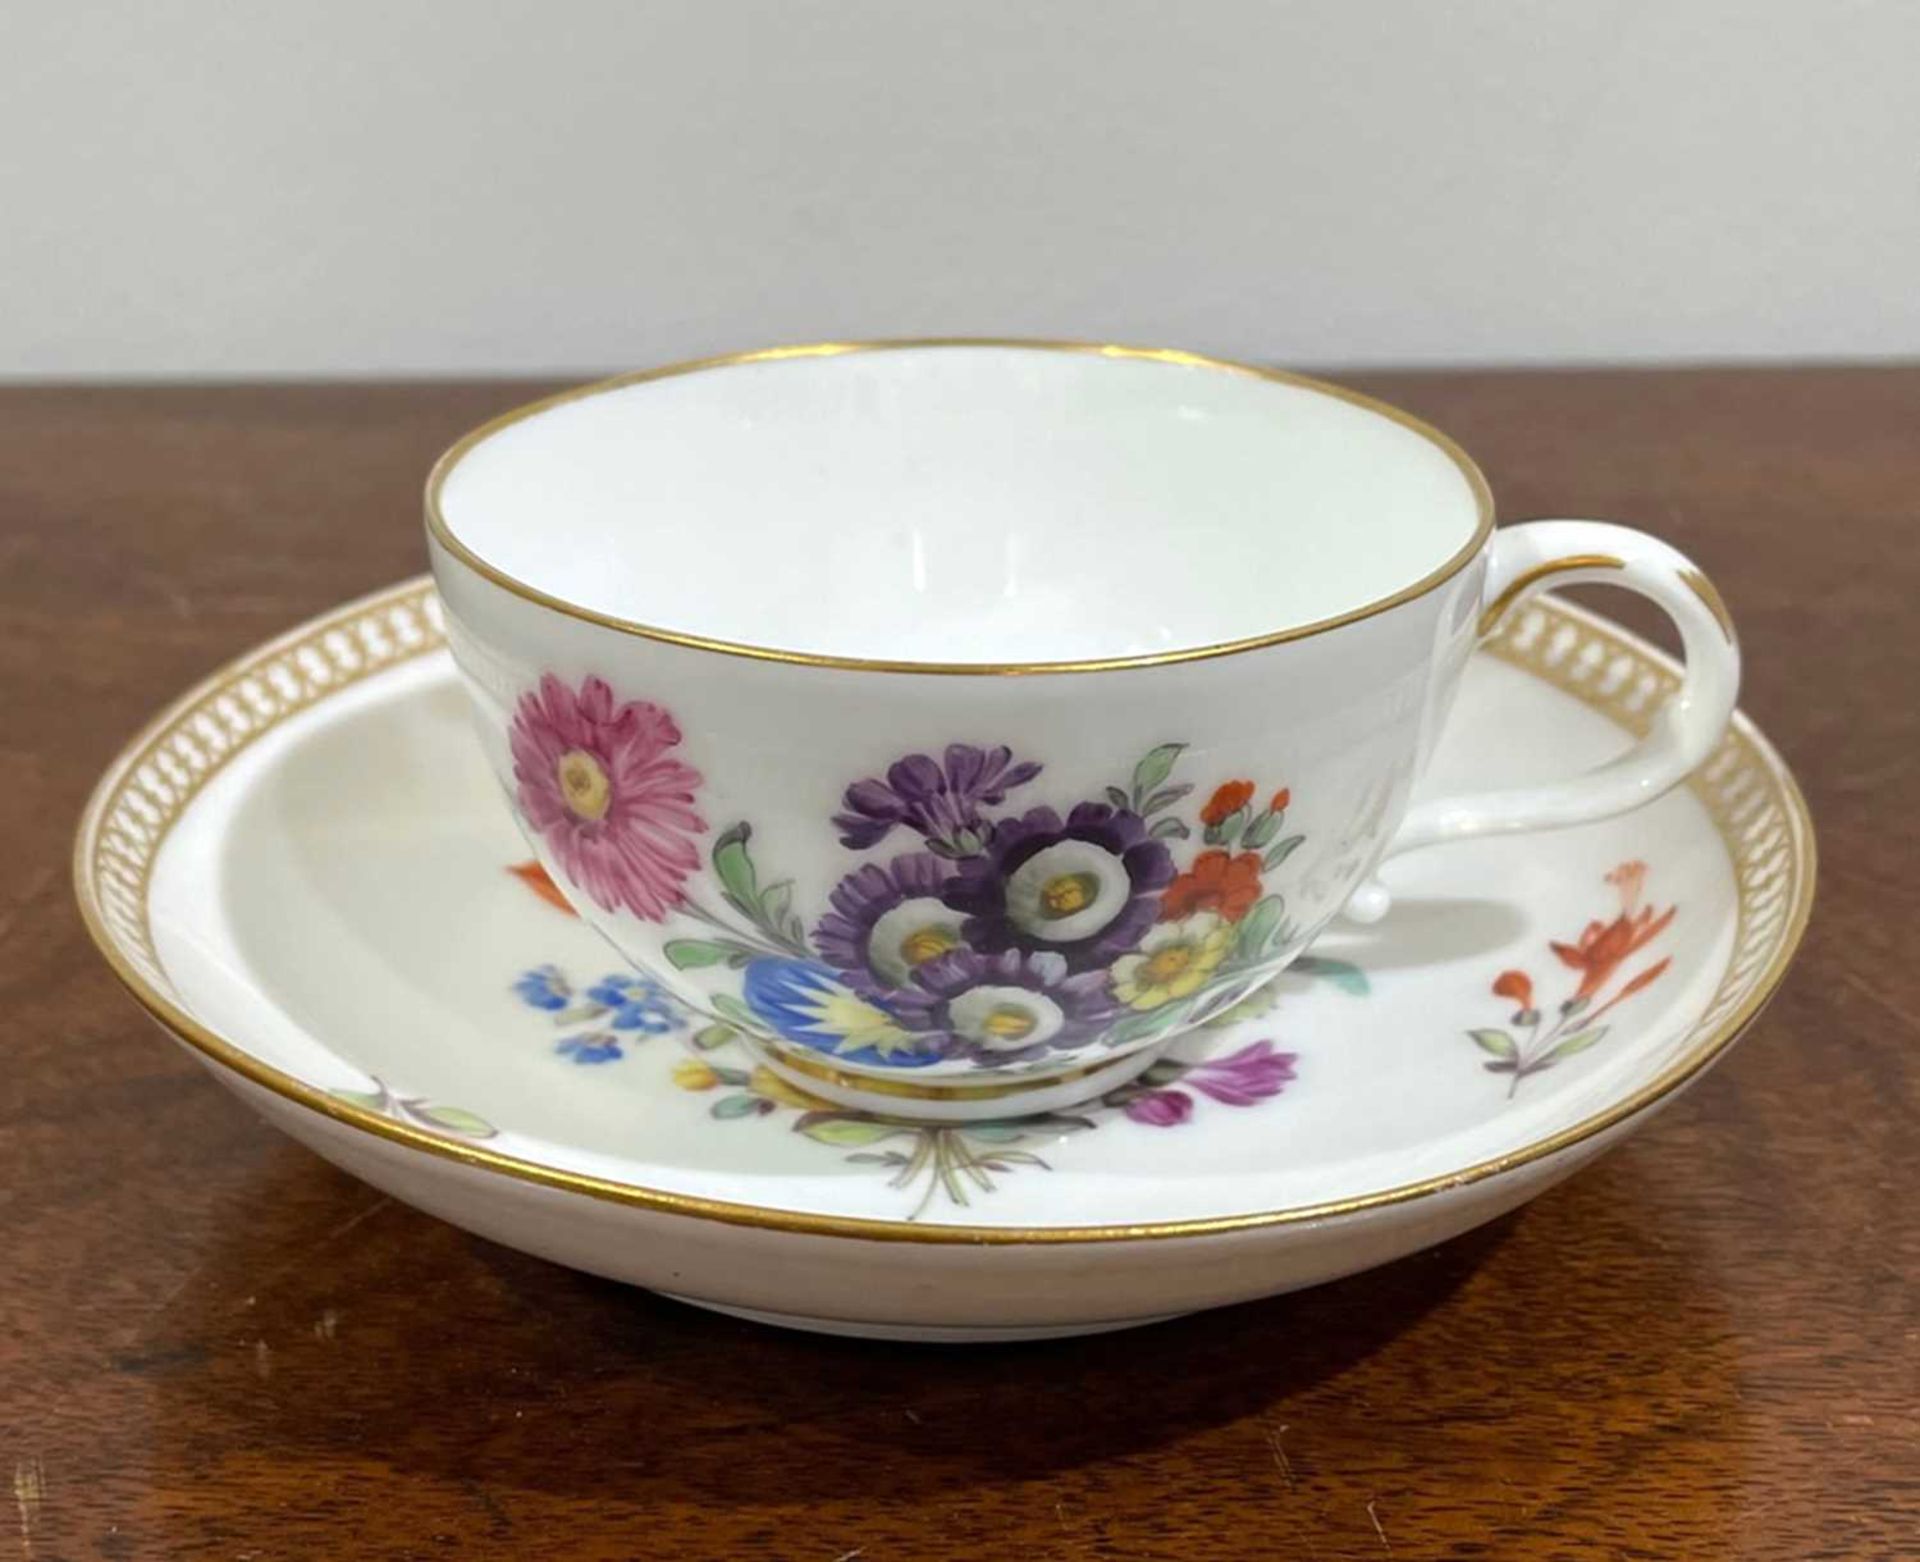 Meissen cabinet cup and saucer porcelain, painted with flowers and gilt decoration, underglaze